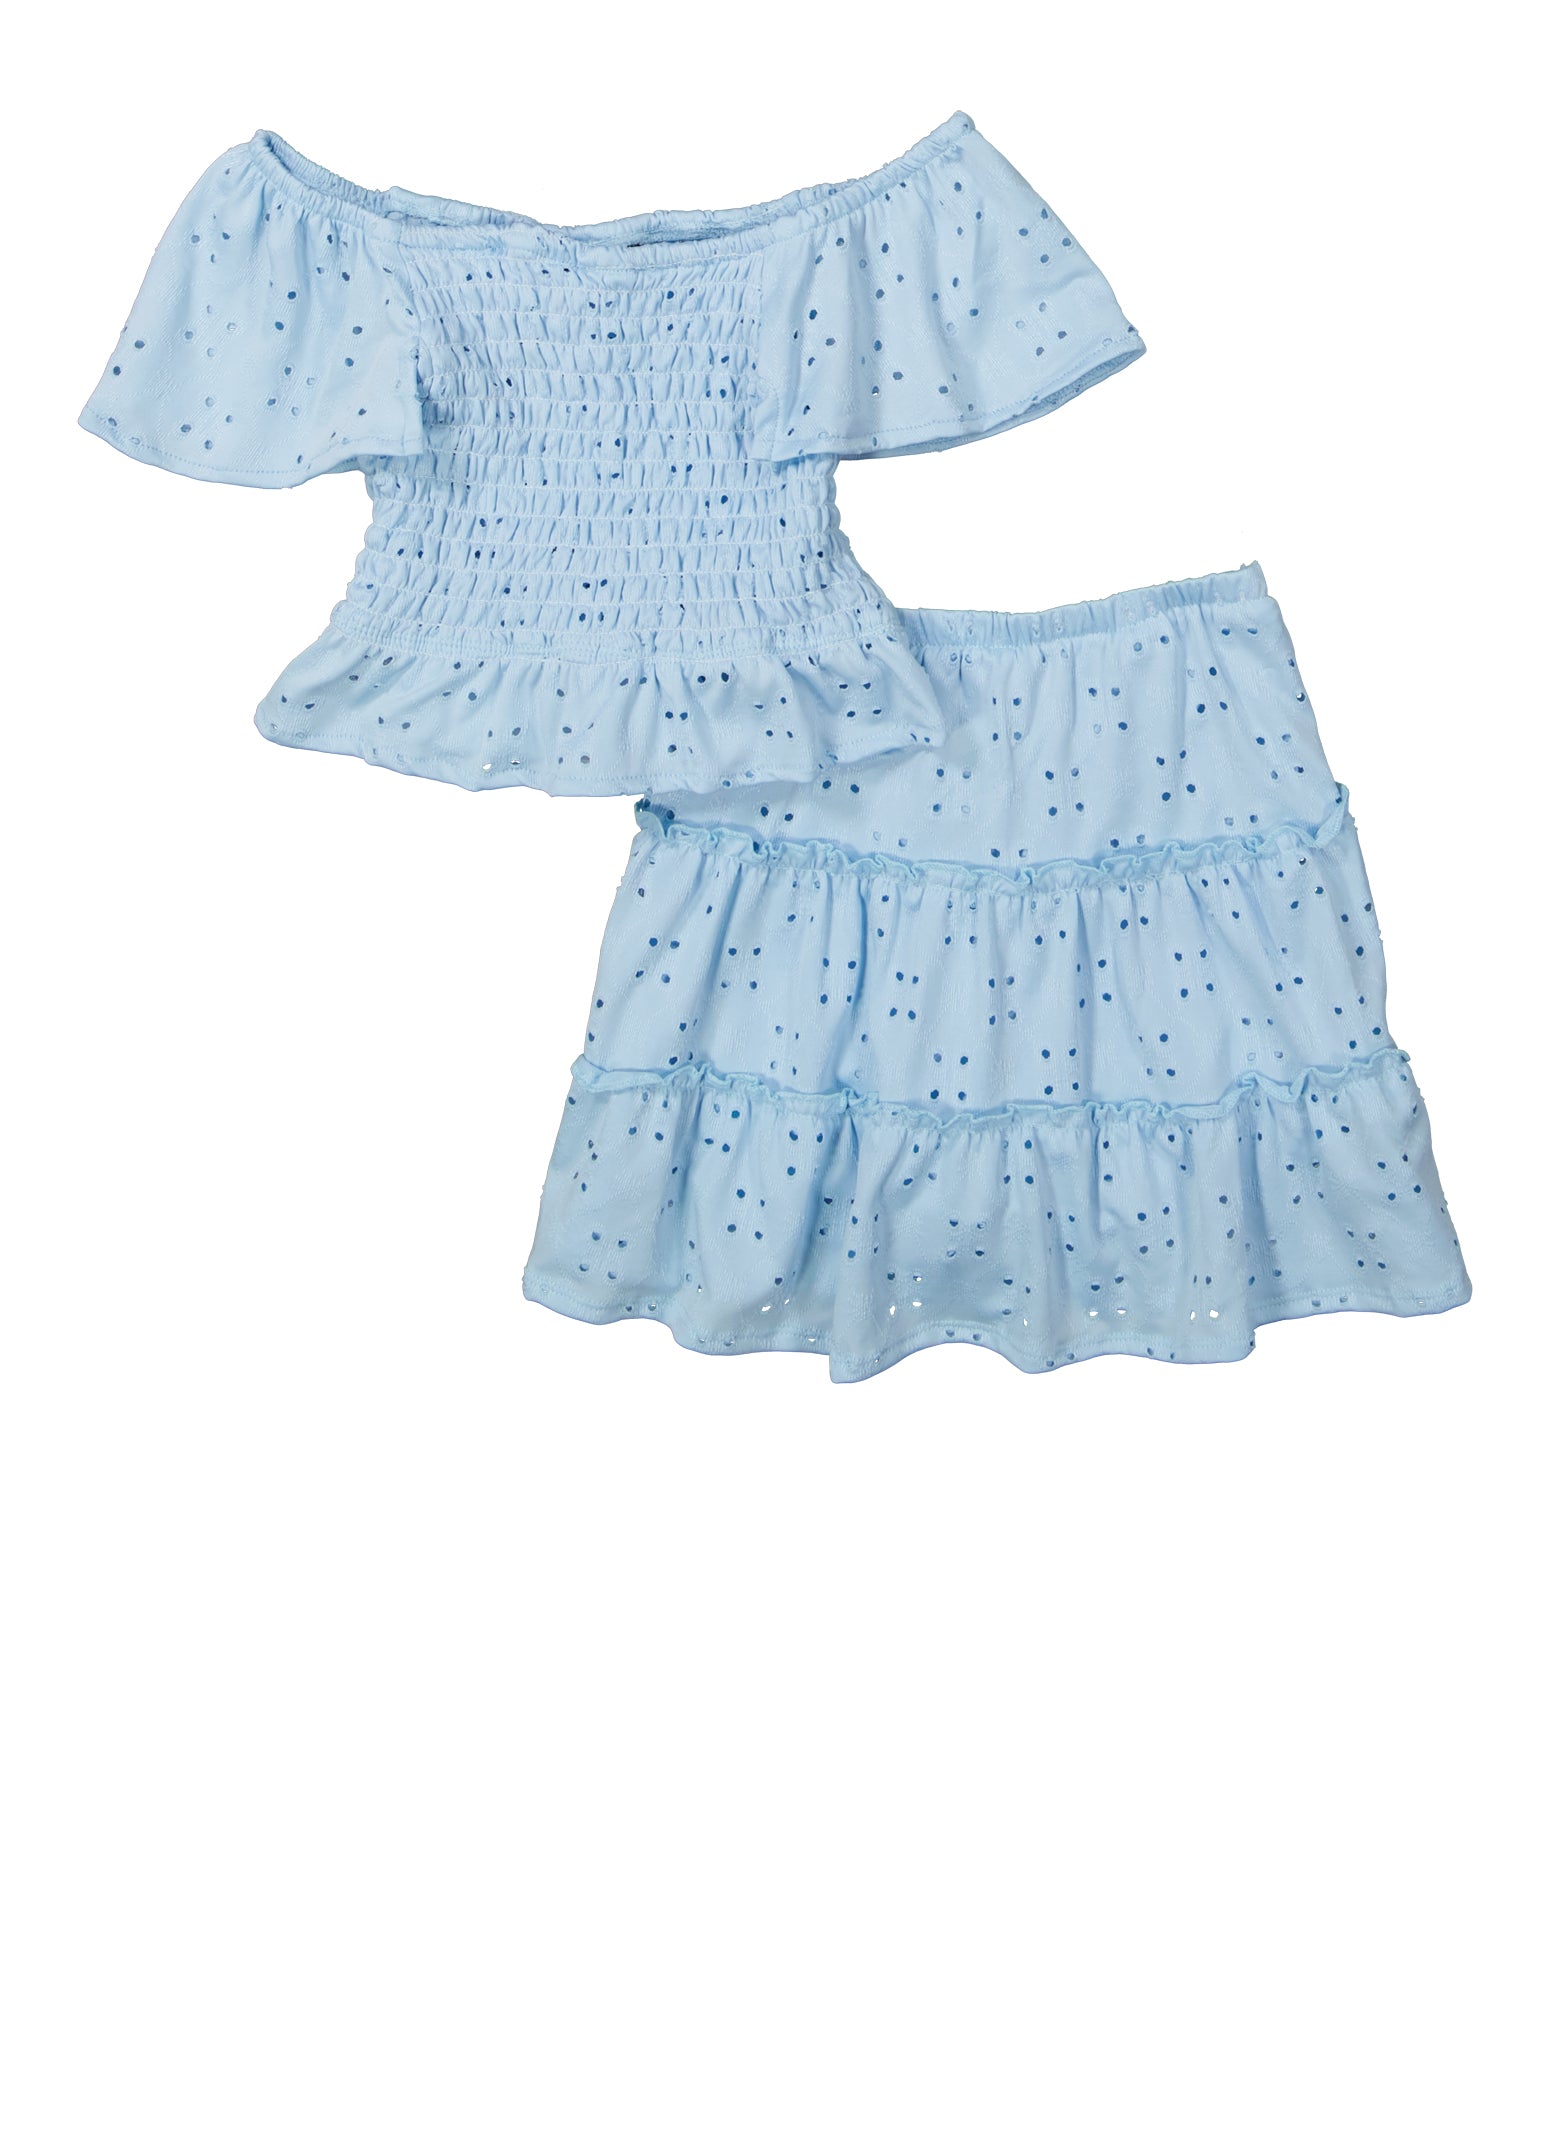 Little Girls Eyelet Smocked Top and Tiered Skirt, Blue, Size 5-6